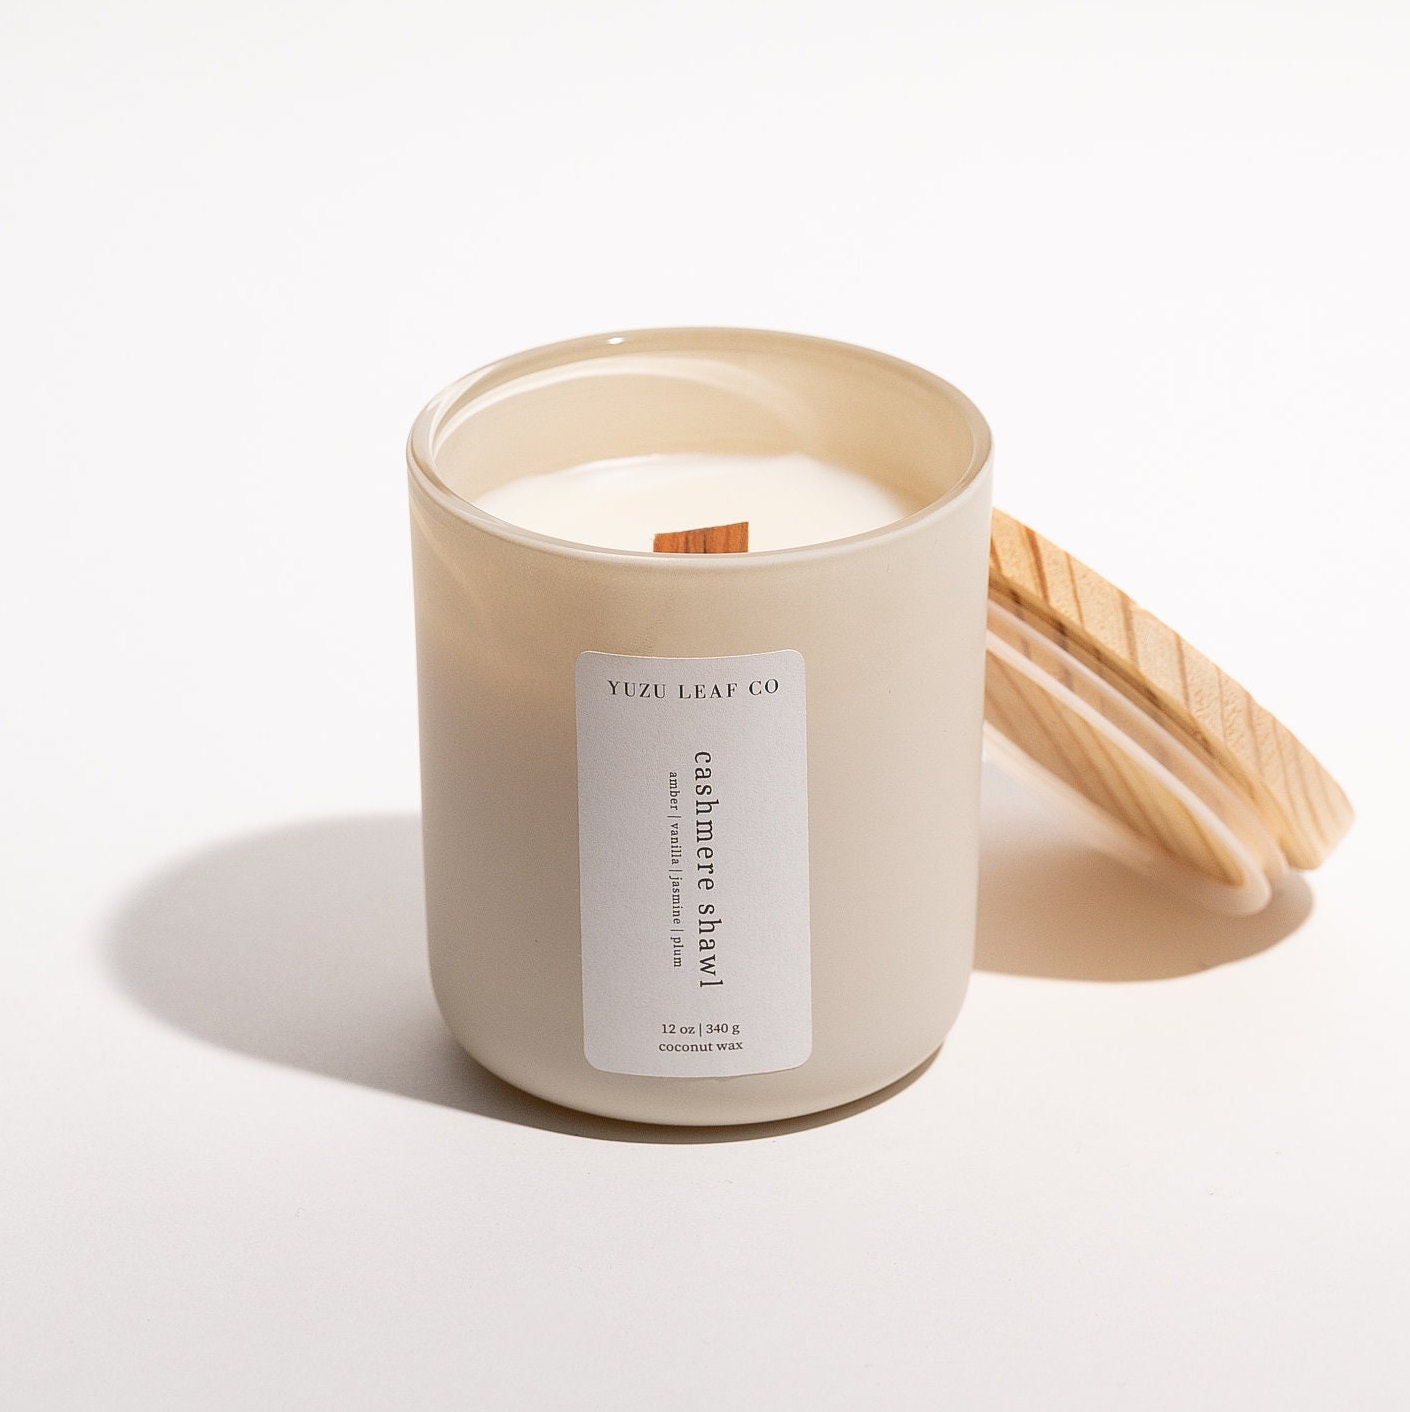 There is a large, cylindrical glass jar candle with a matte finish. The wooden lid is leaning against the glass jar, displaying the wooden wick in the middle. The vertical label says "cashmere shawl: amber, vanilla, jasmine, plum."